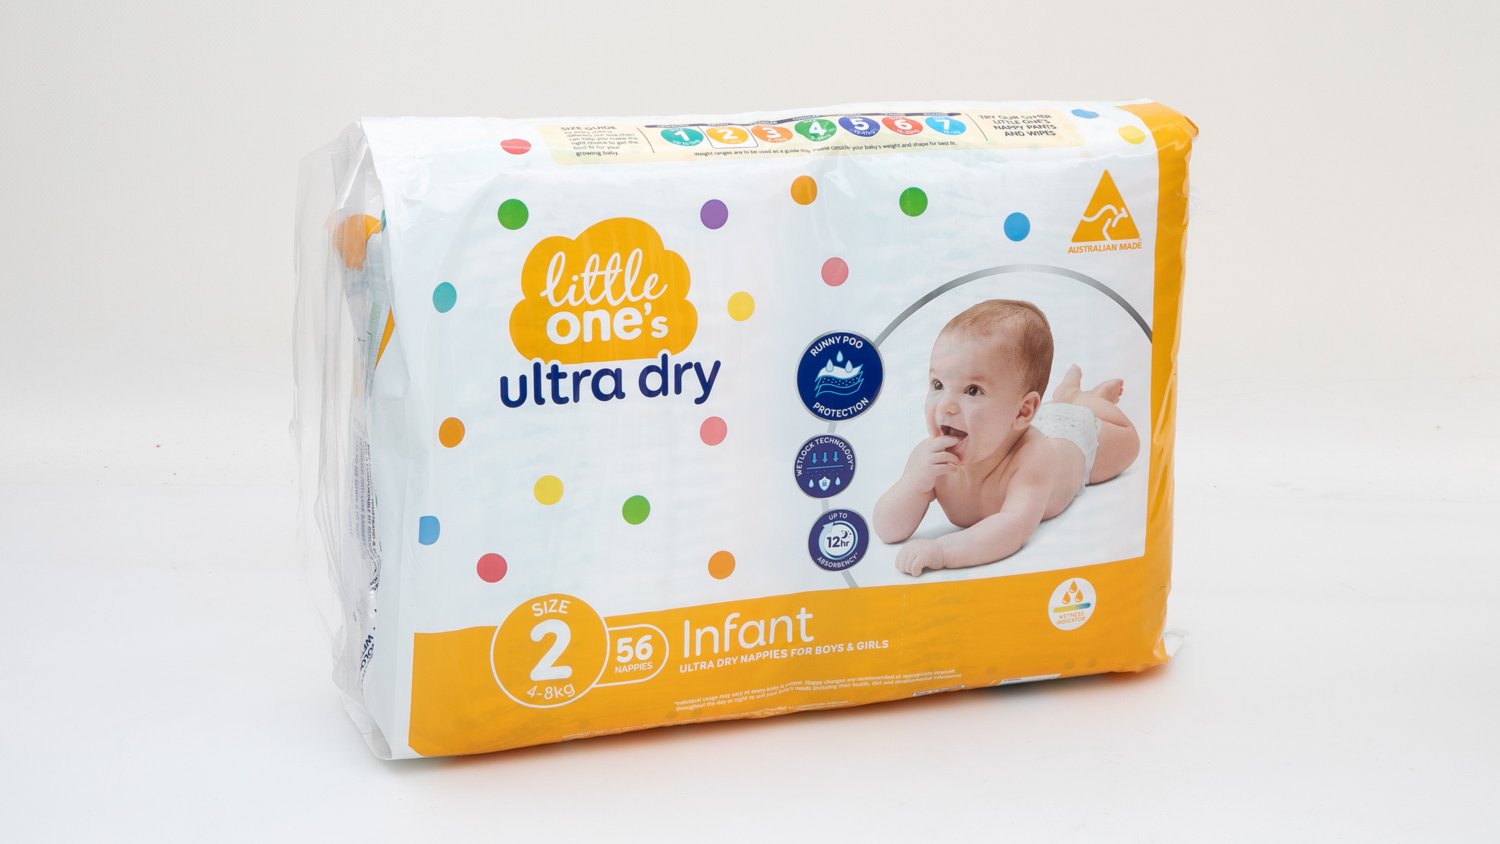 Woolworths Little One's Ultra Dry Size 2 Infant carousel image